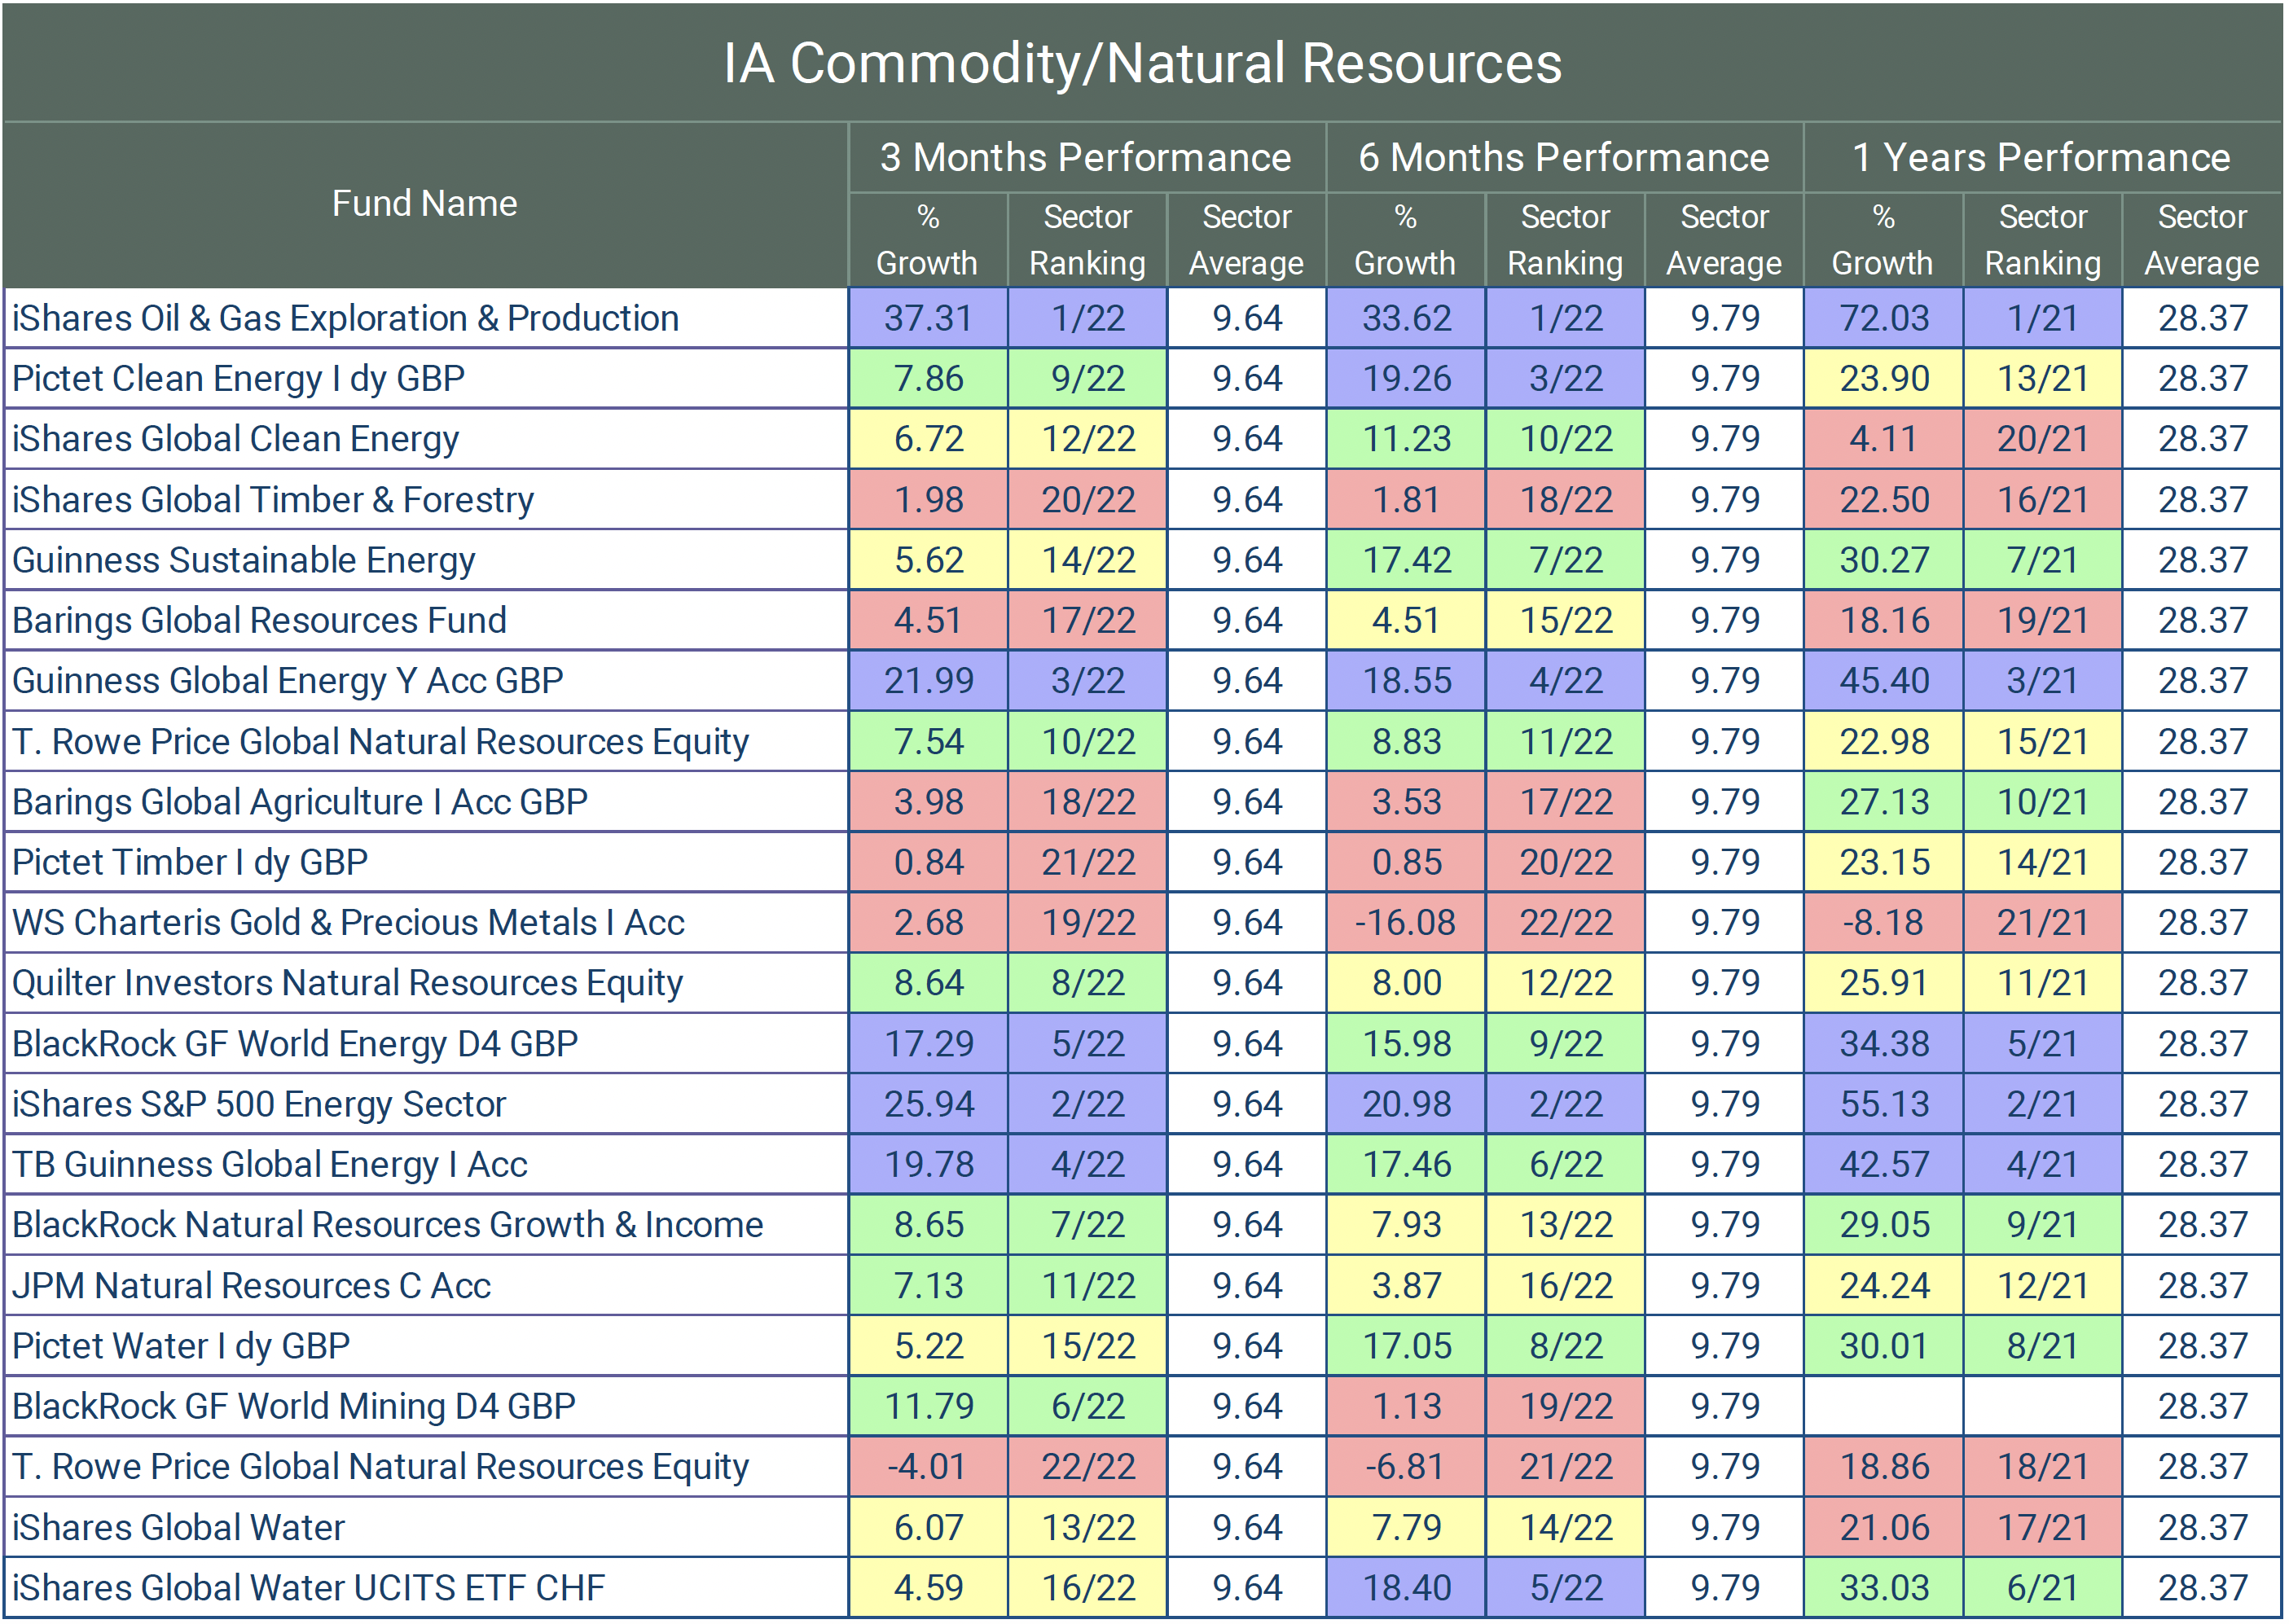 IA CommodityNatural Resources